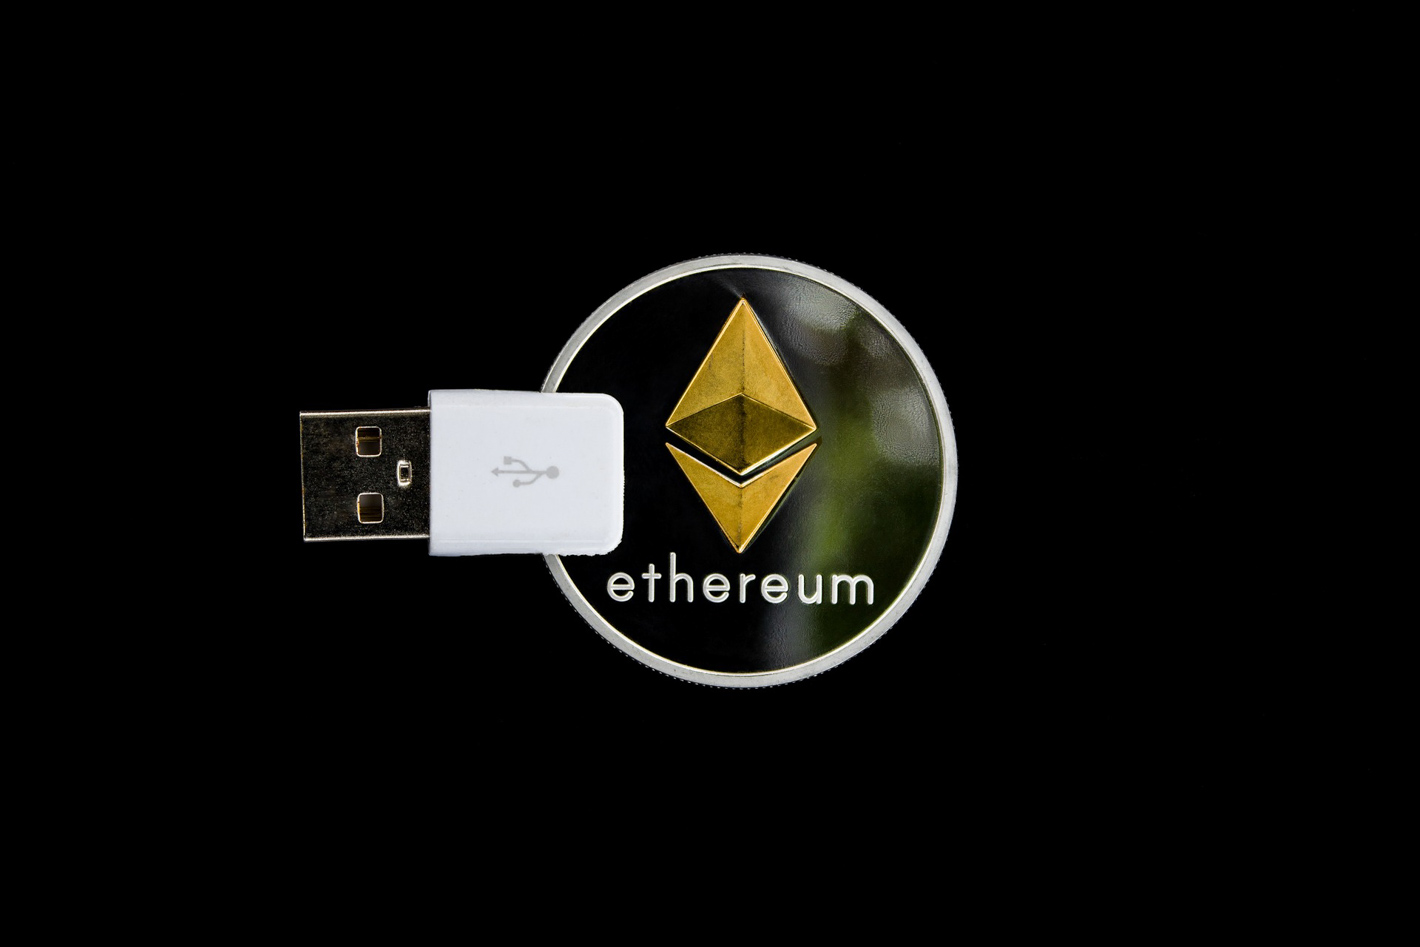 Apps that give ethereum lost bitcoins